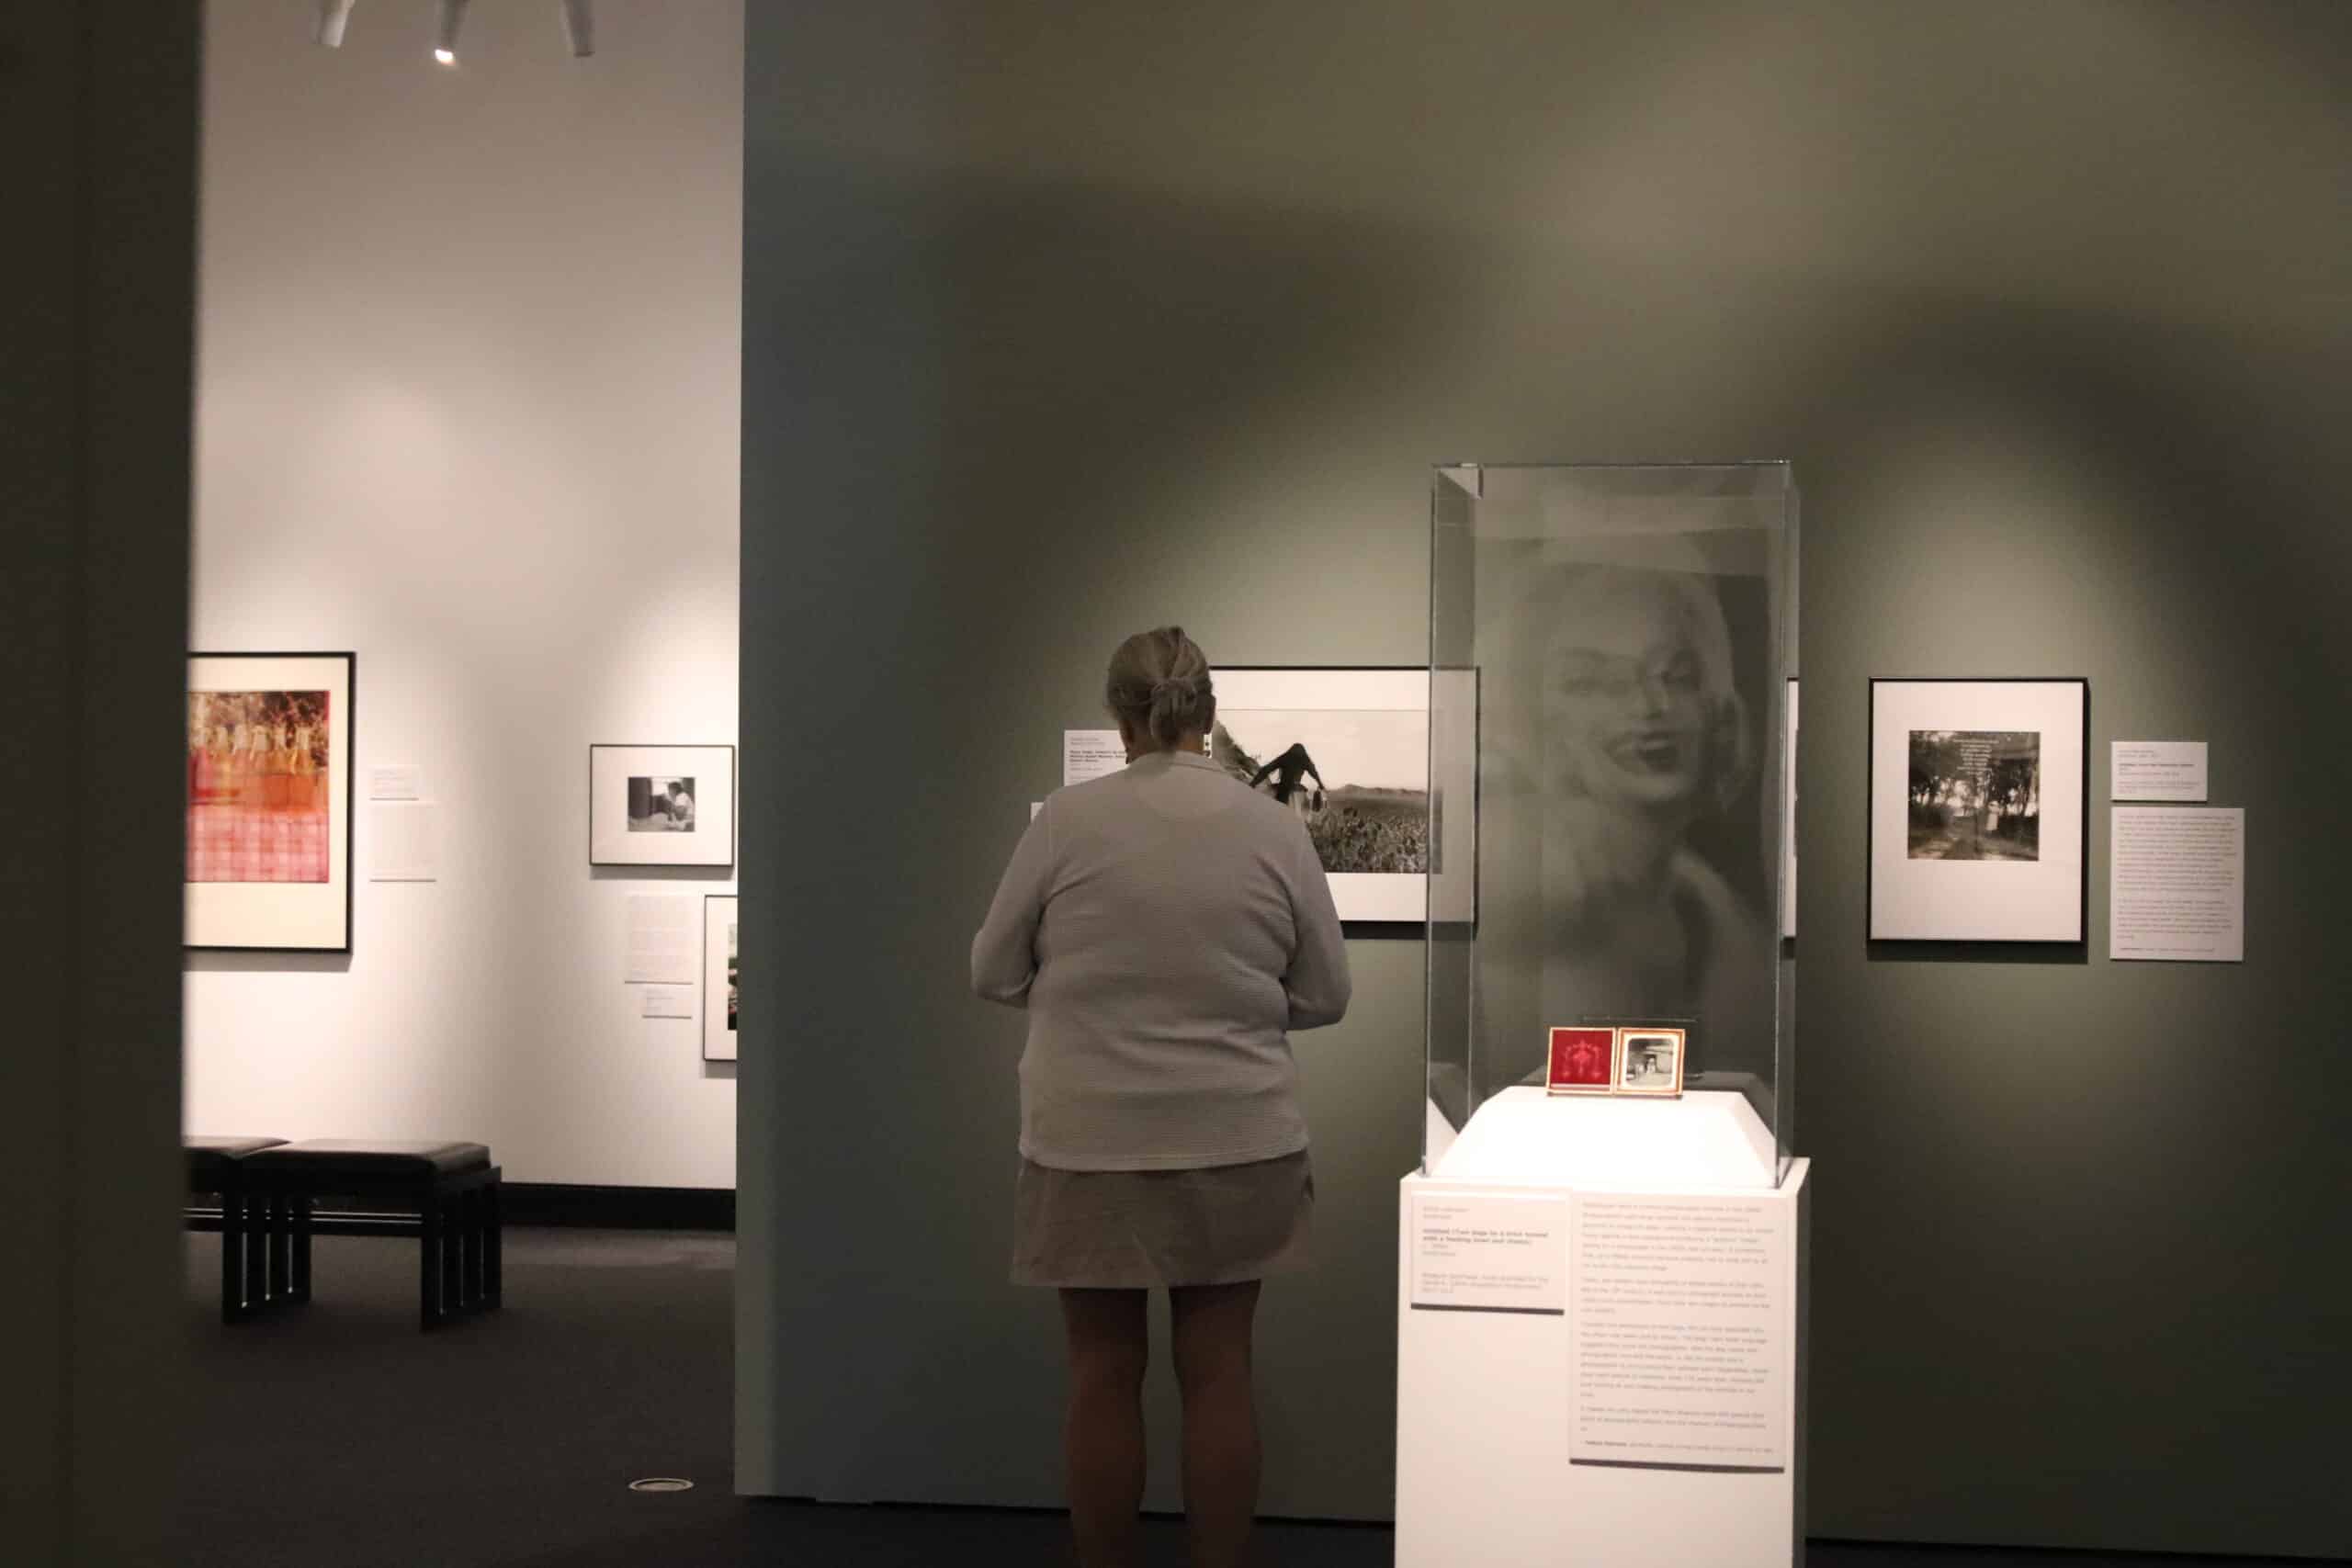 Visitor looking at a photograph in the gallery.